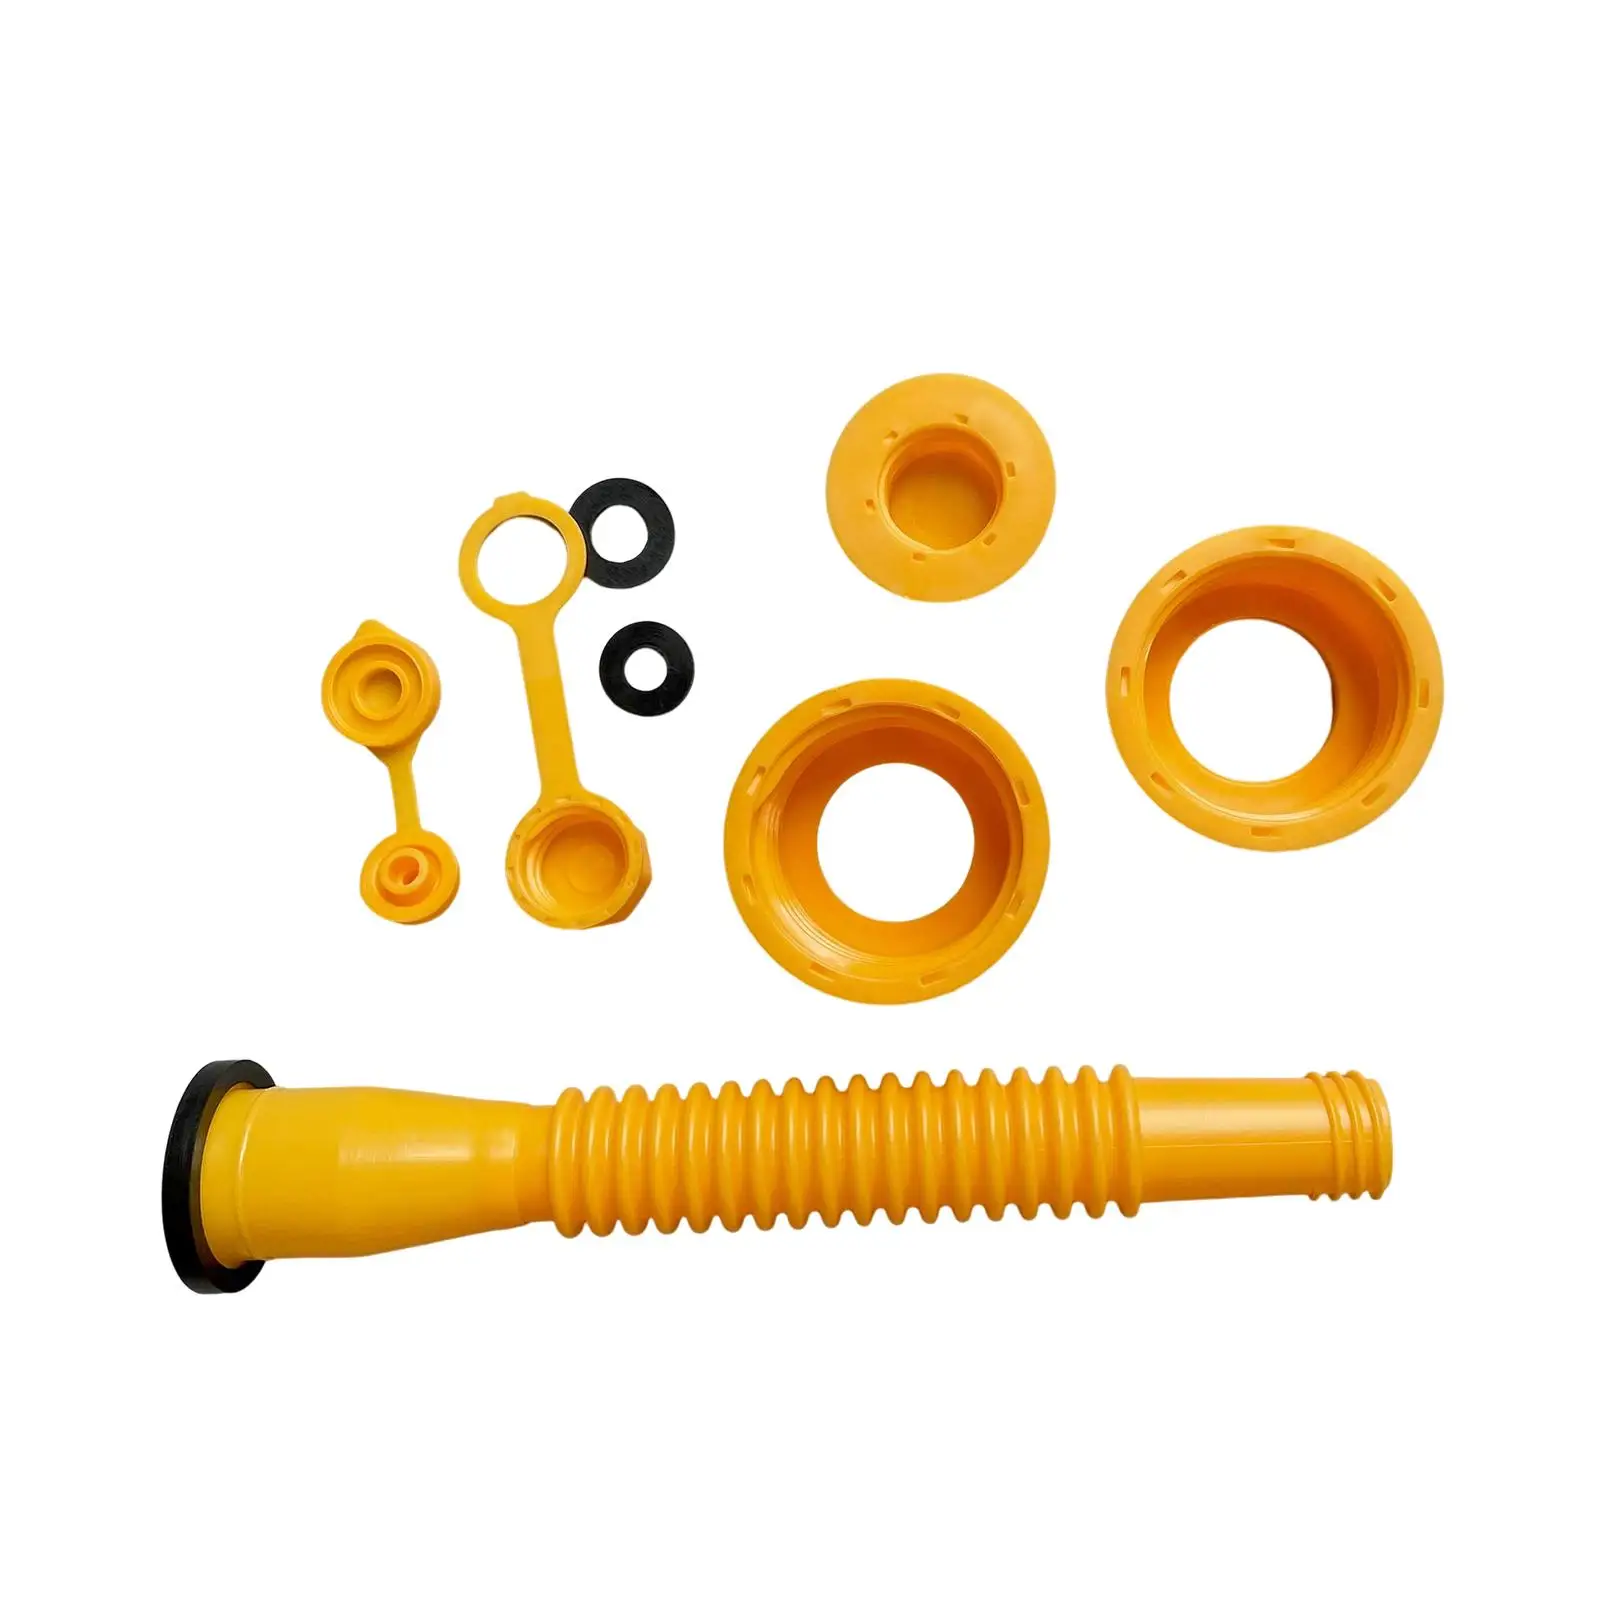 Gas Can Spout Kit Plastic Gas Nozzle Plug Replacement for Petrol Cans